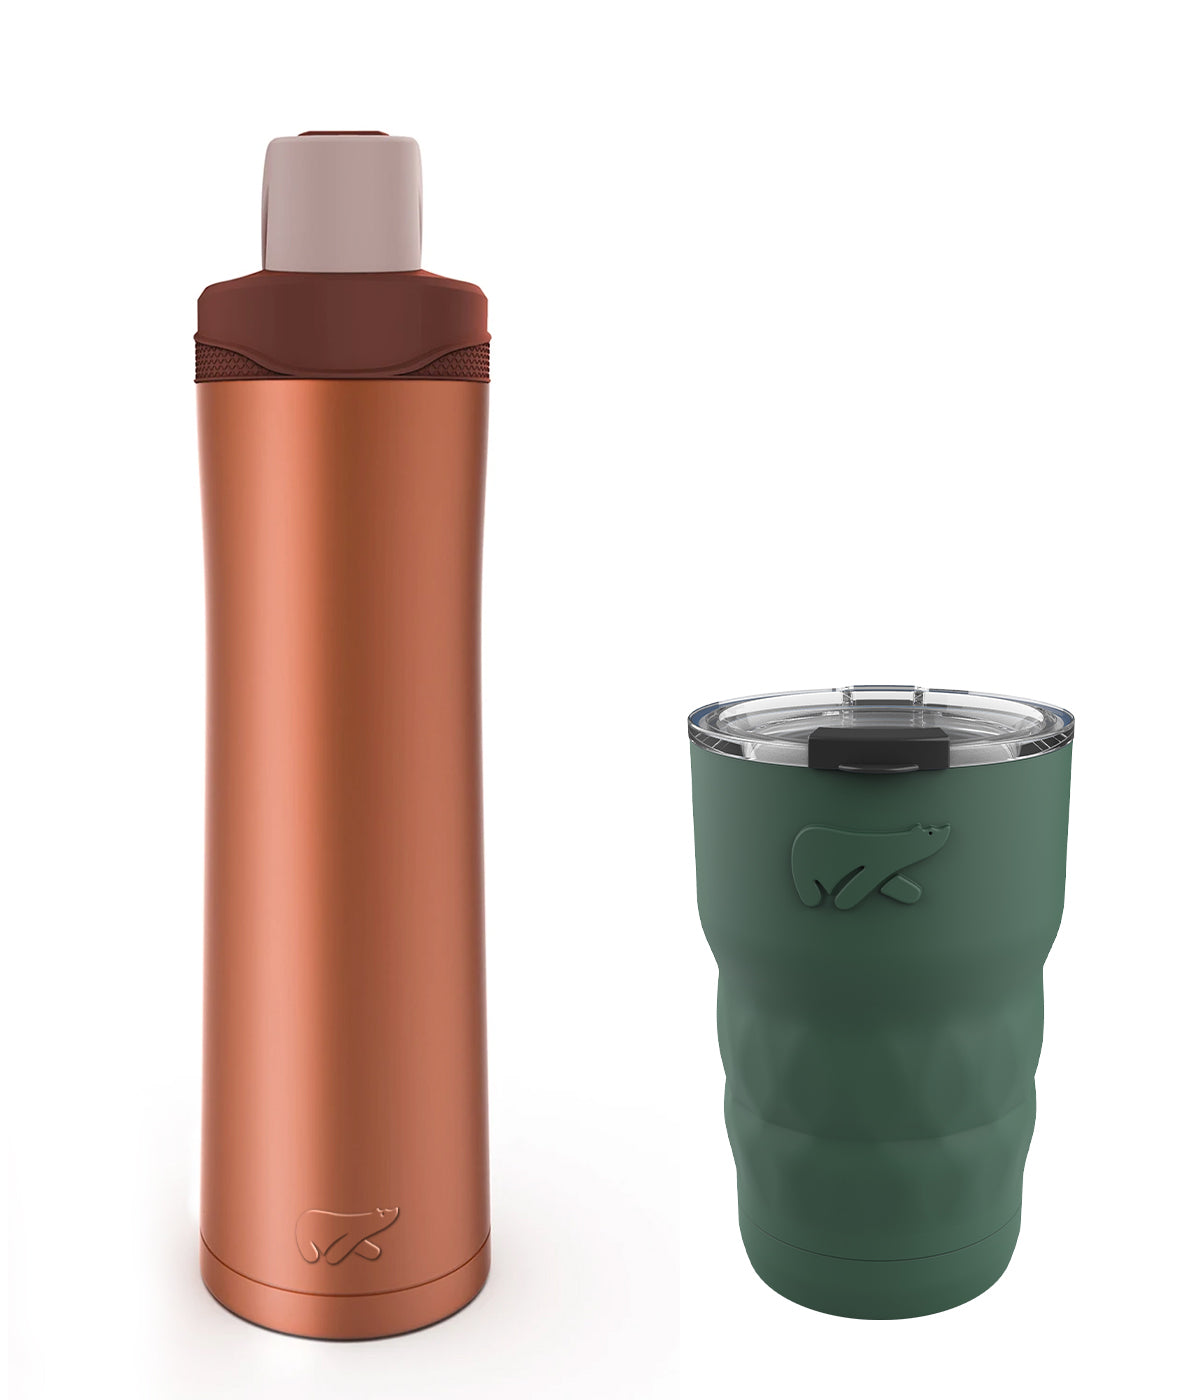 Chilled Hydration Combo (Java Coffee Mug 360 ML Green + Minsk Insulated Bottle 750 ML - Coral)